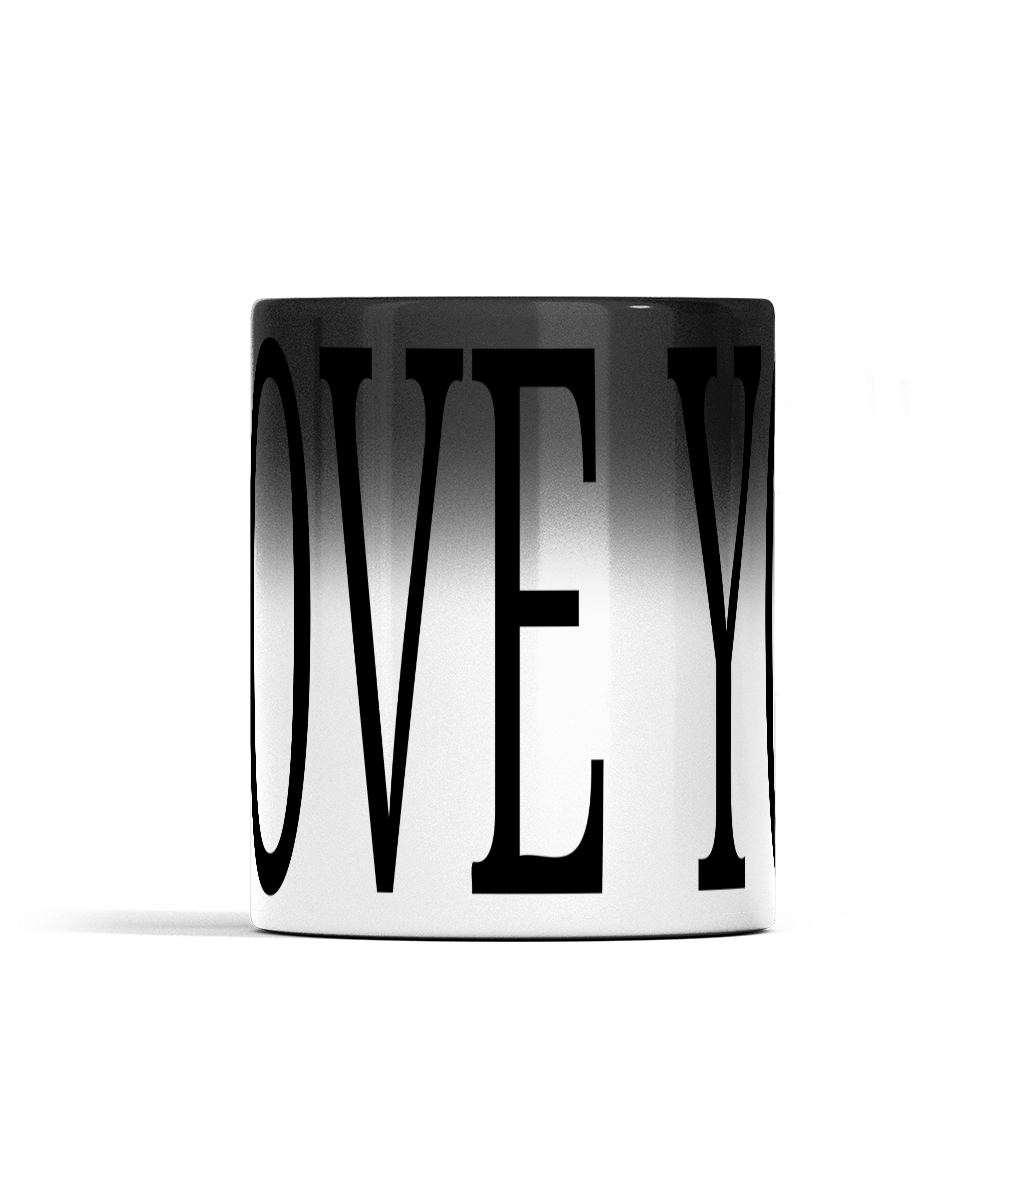 11oz I LOVE YOU Colour Changing Mug For Tea, Coffee Or Hot Drinks Black Colour When Cold I LOVE YOU Appears And Turns To White Ceramic Tea Cup When Warm